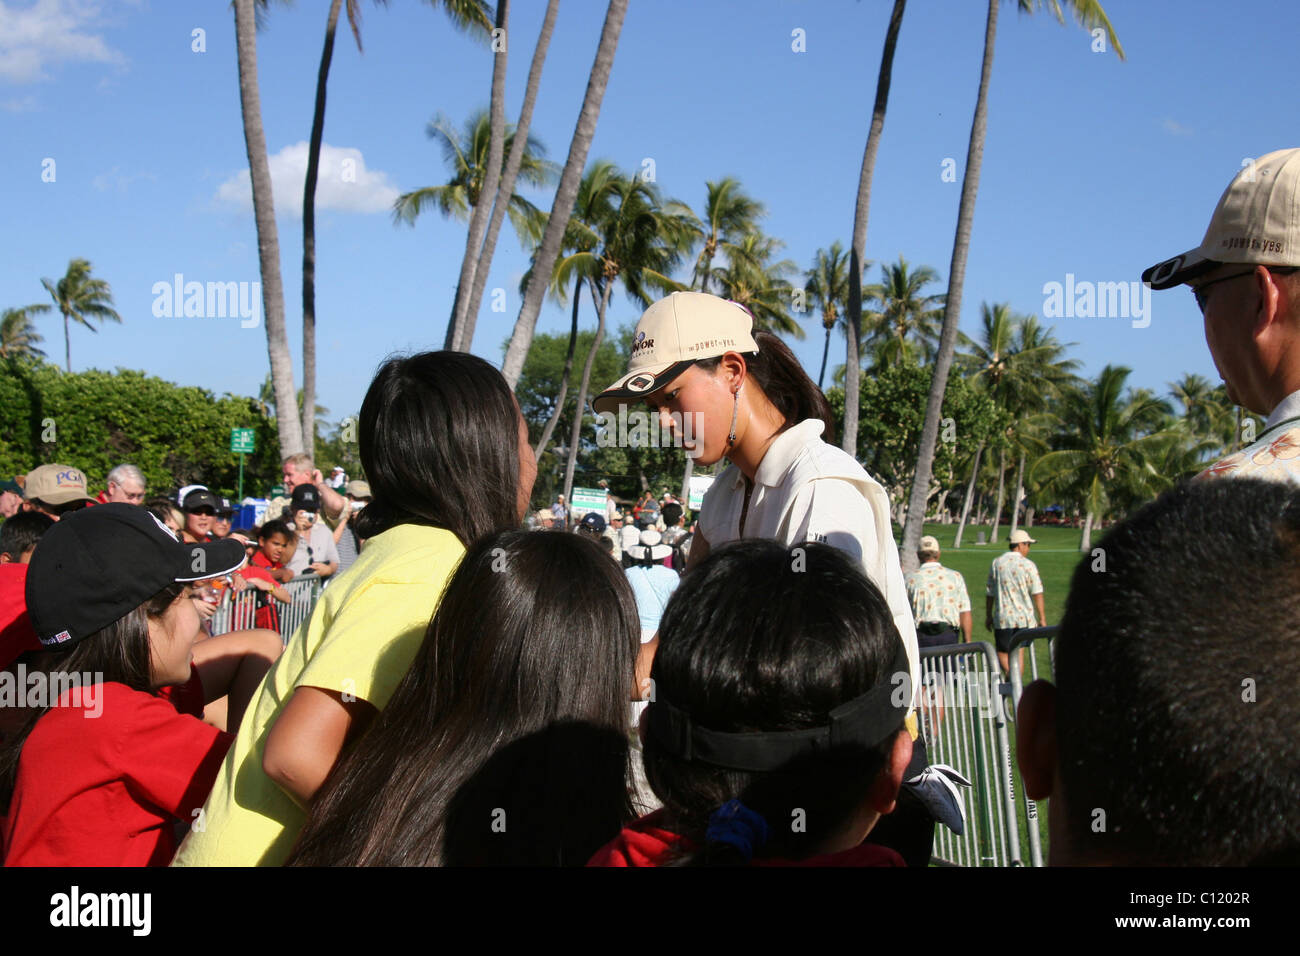 Fifteen year old child golf star Michelle Wie is signing autographs for golf fans prior to the PGA 2005 Sony Open In Hawaii. Stock Photo